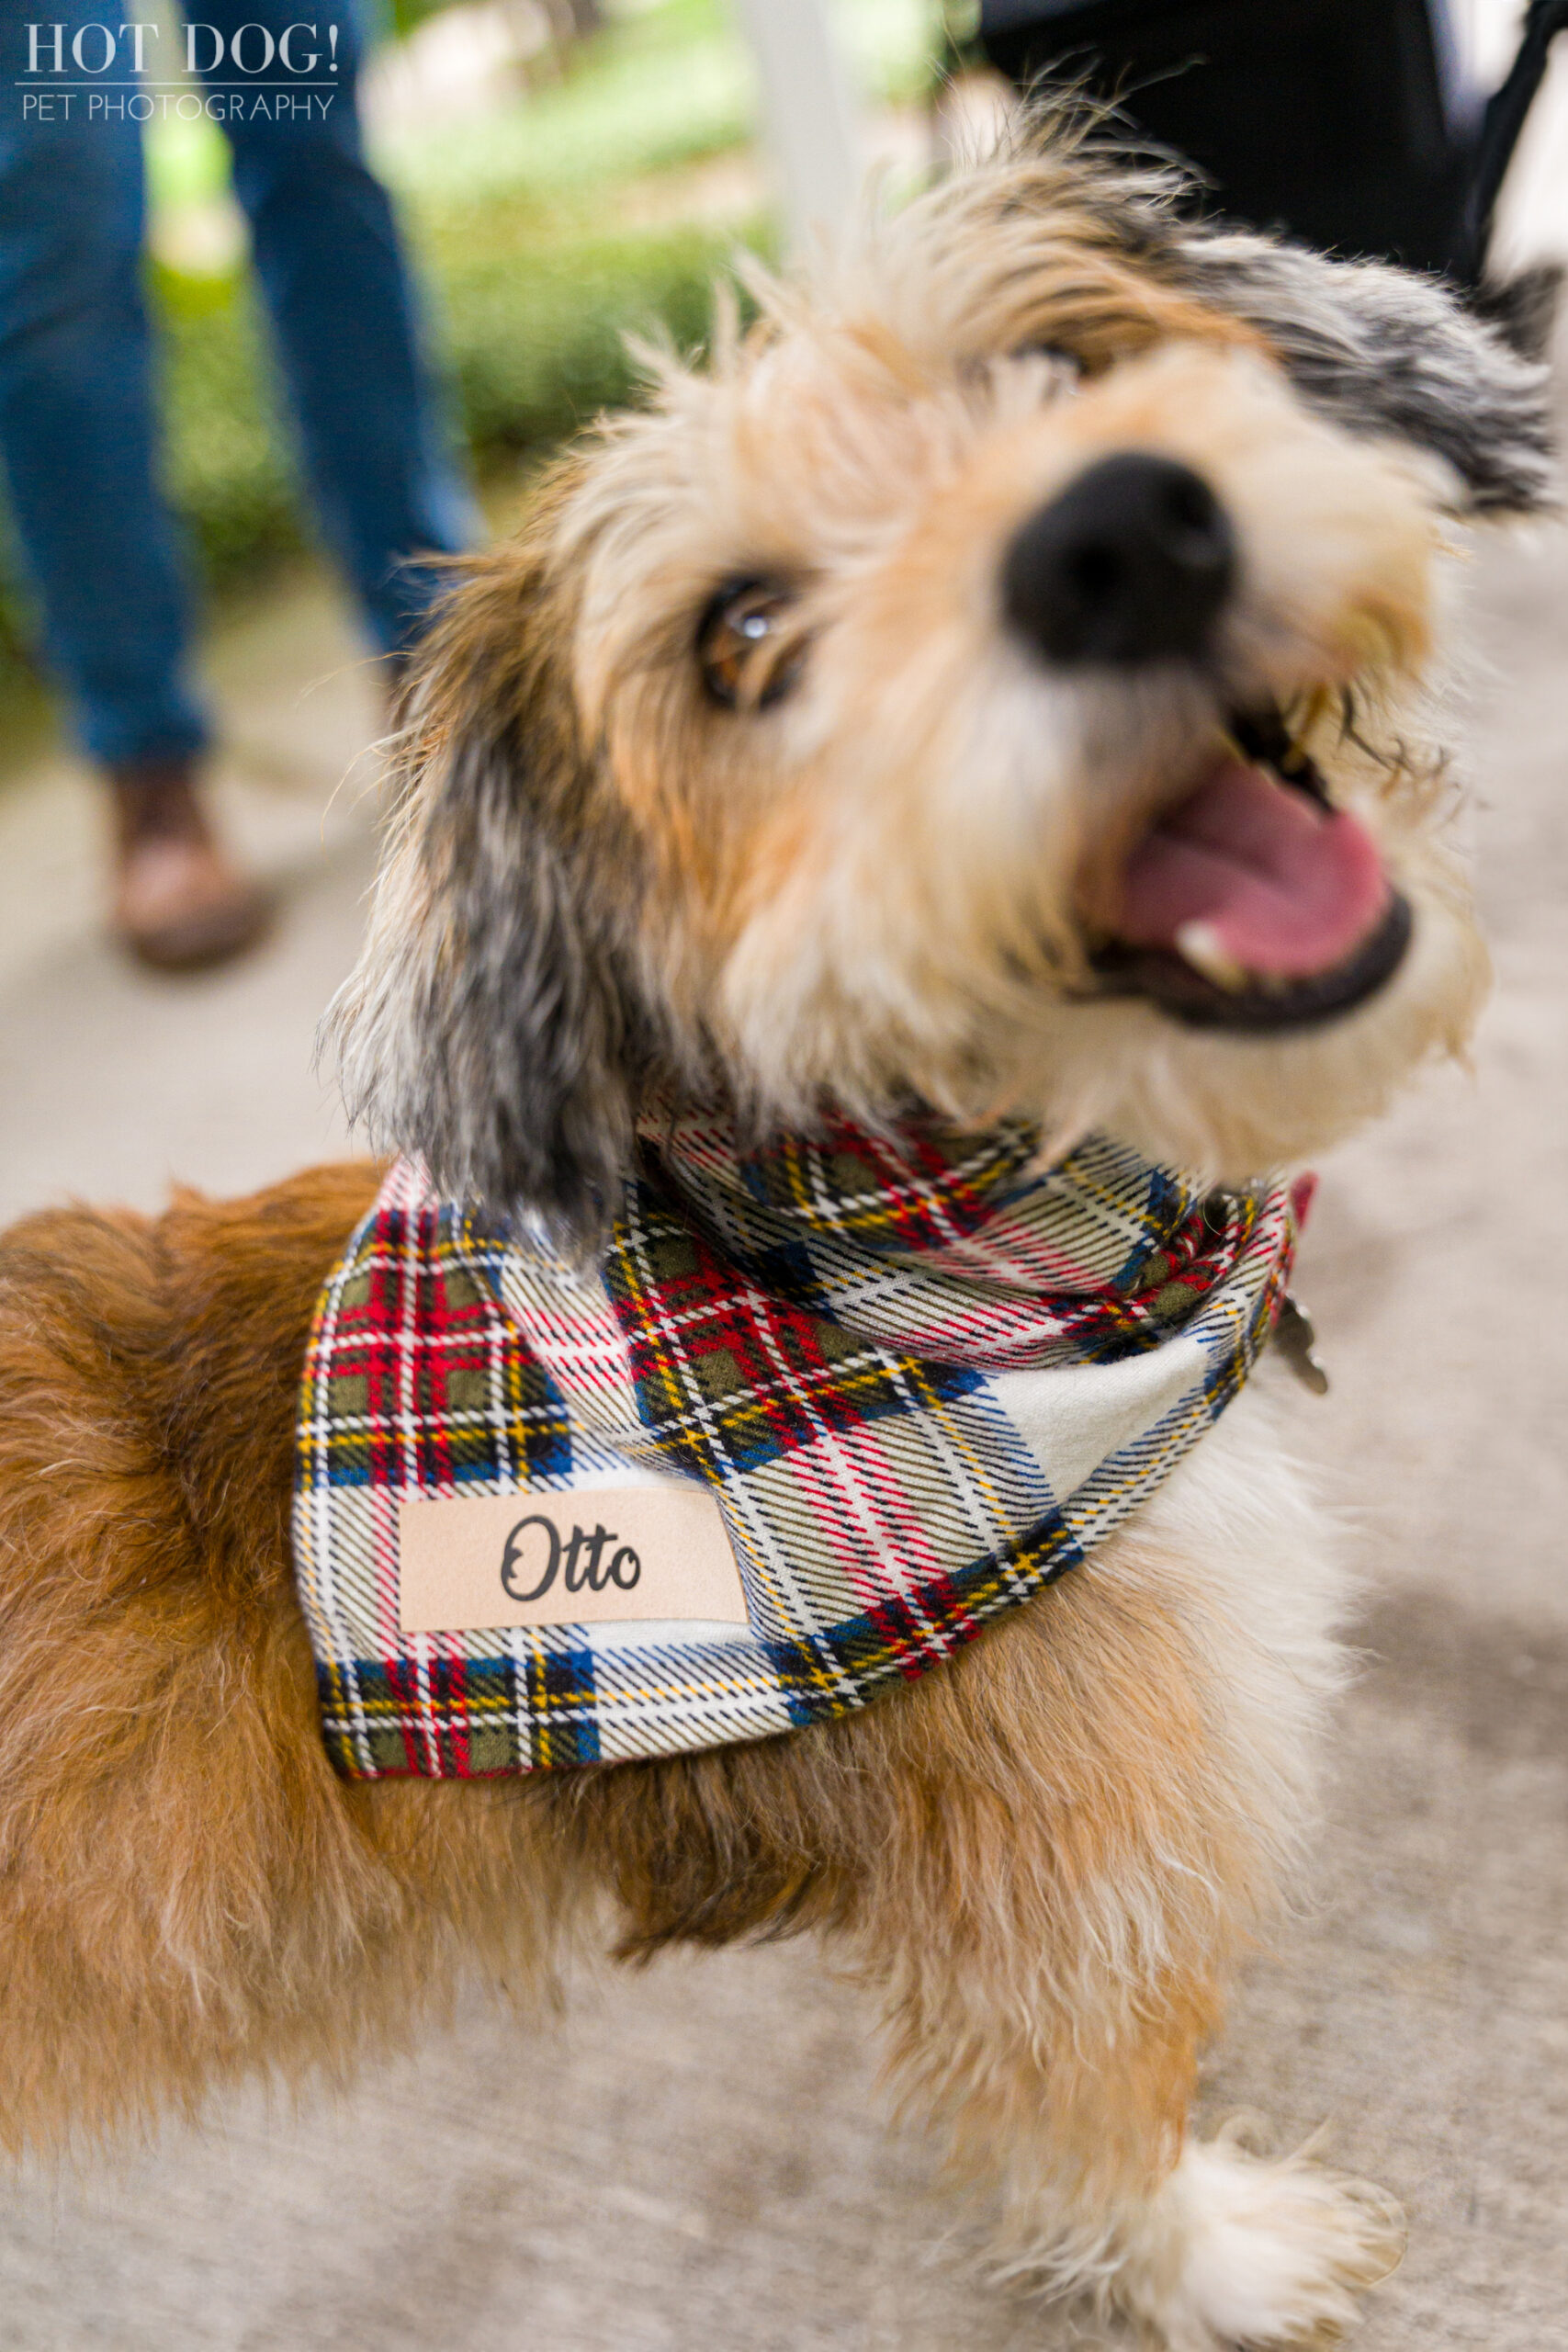 Otto the terrier mix is the perfect model for a professional pet photo session, and Hot Dog! Pet Photography is the perfect photographer to capture his unique personality.